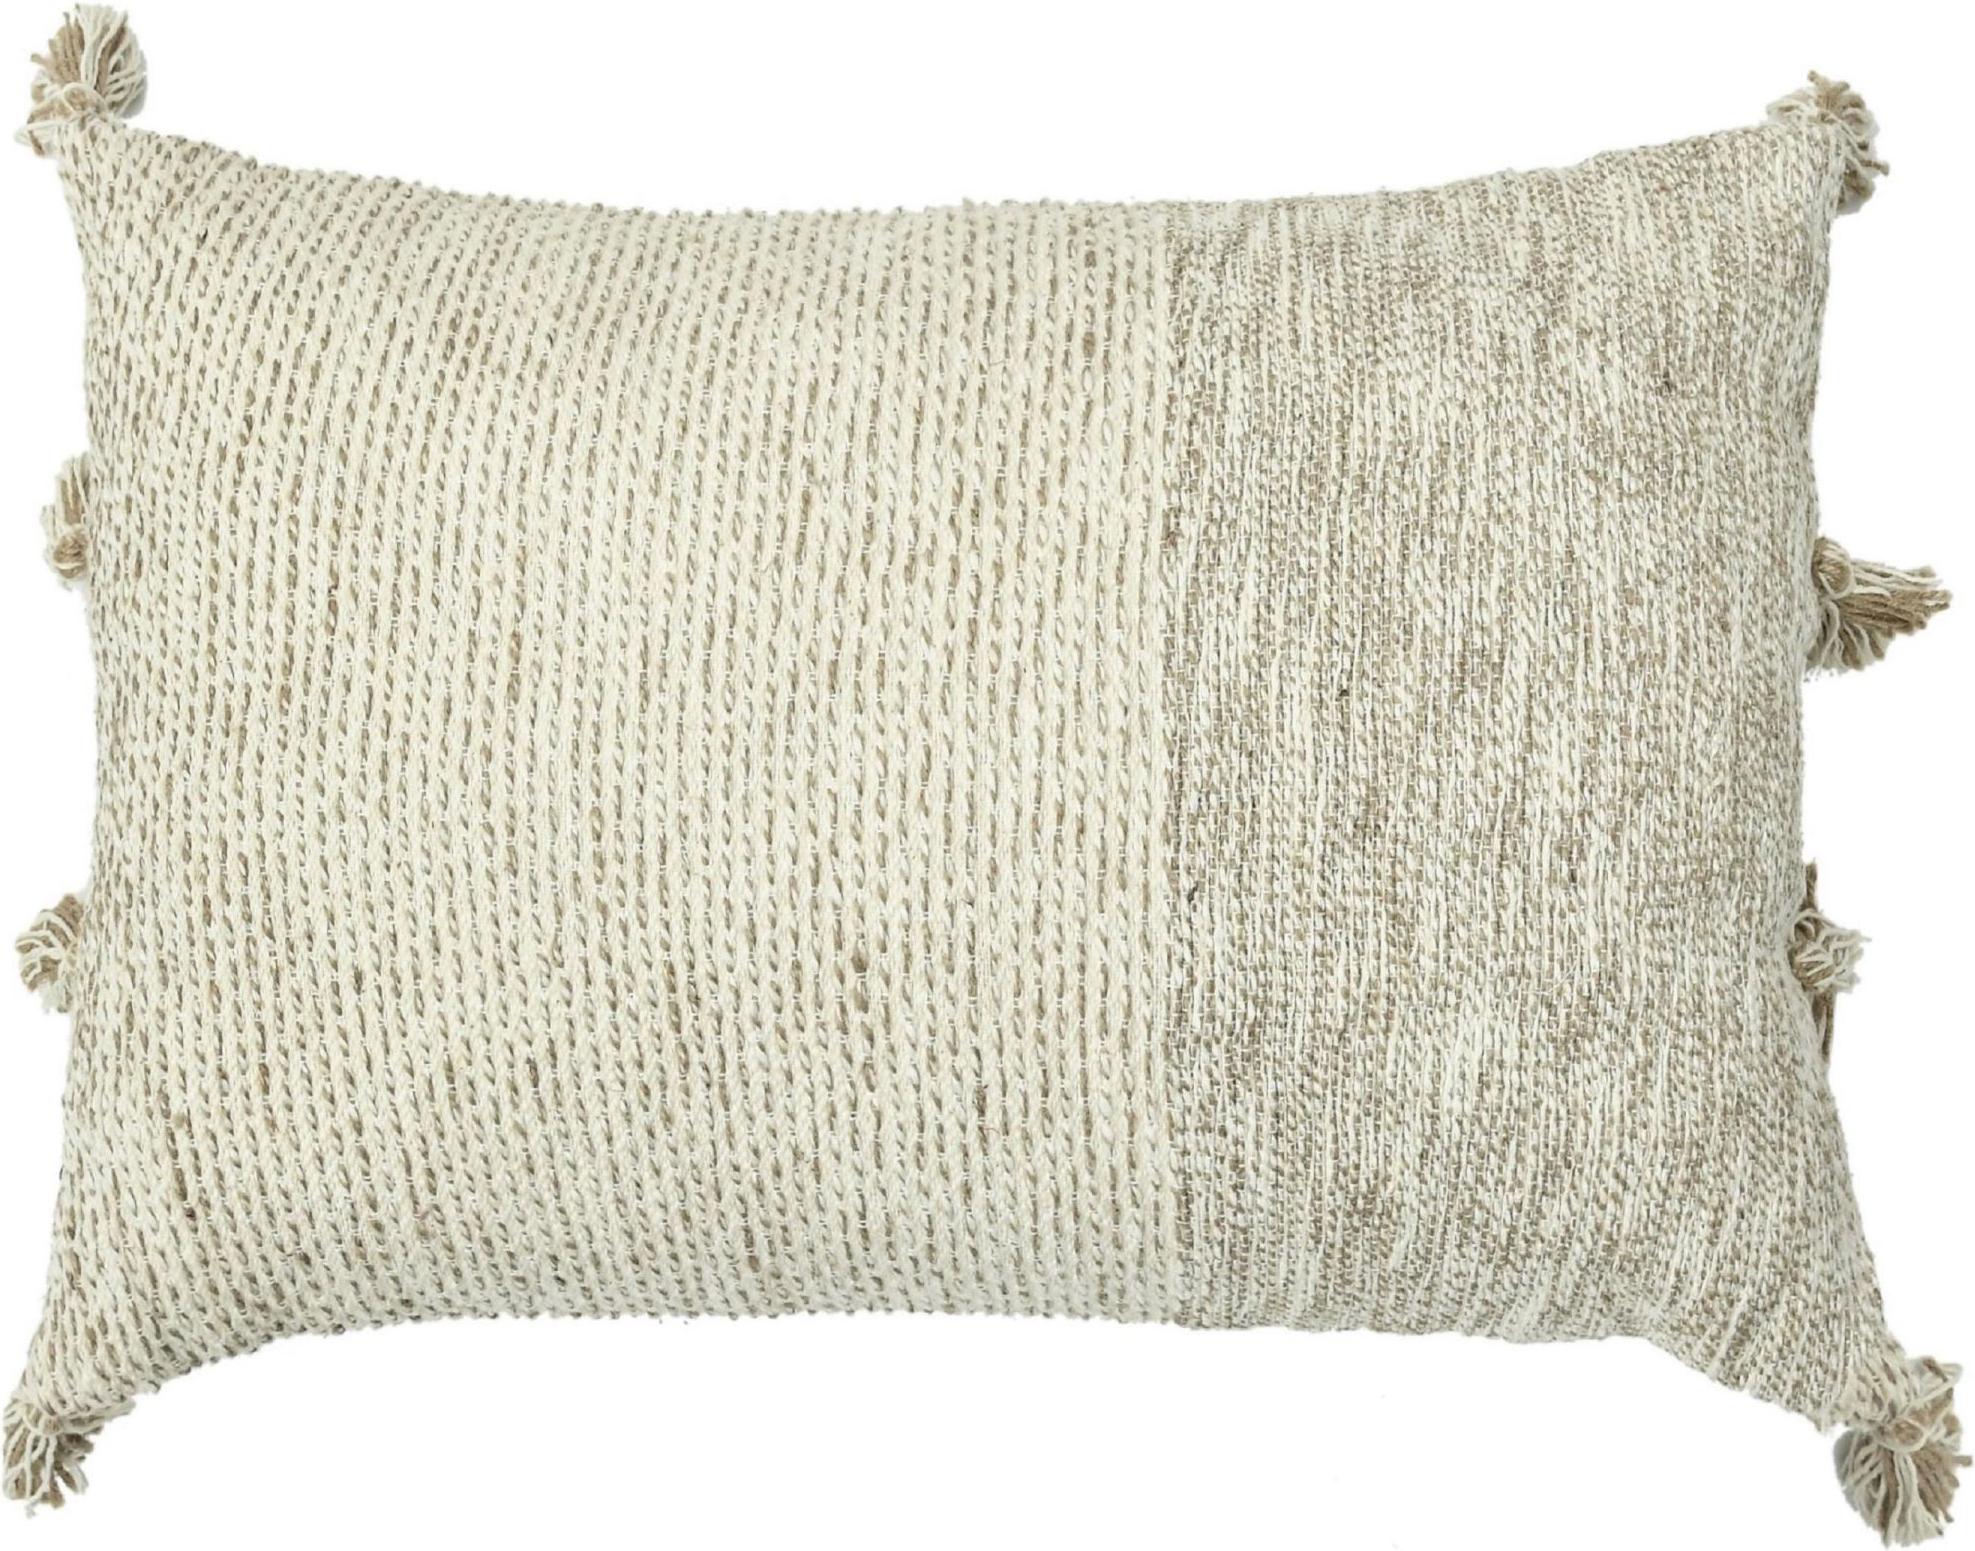 Indian Boho Chic Style Contemporary Wool and Cotton Pillow In Beige For Sale